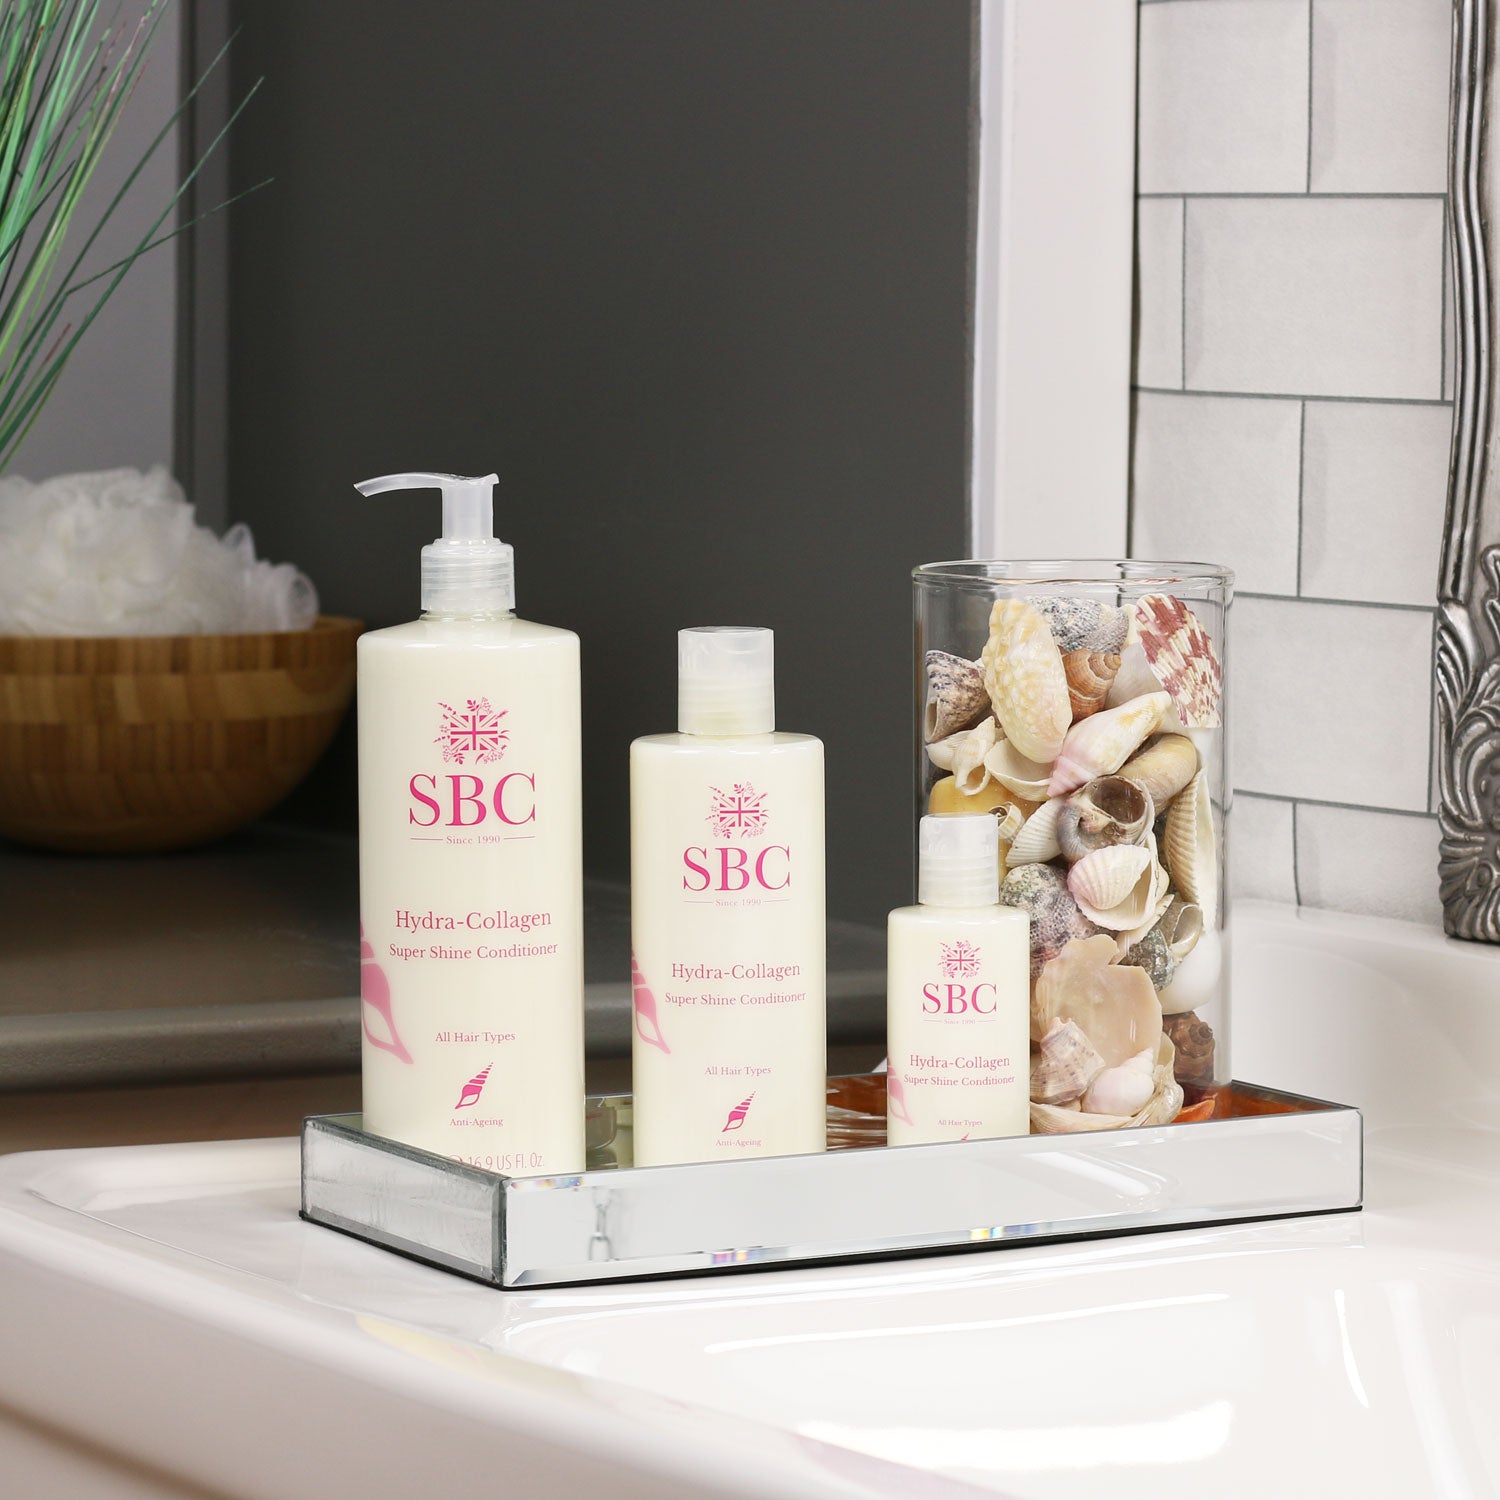 500ml, 300ml and 100ml Hydra-Collagen Super Shine Conditioner in a mirrored dish on a bathroom sink